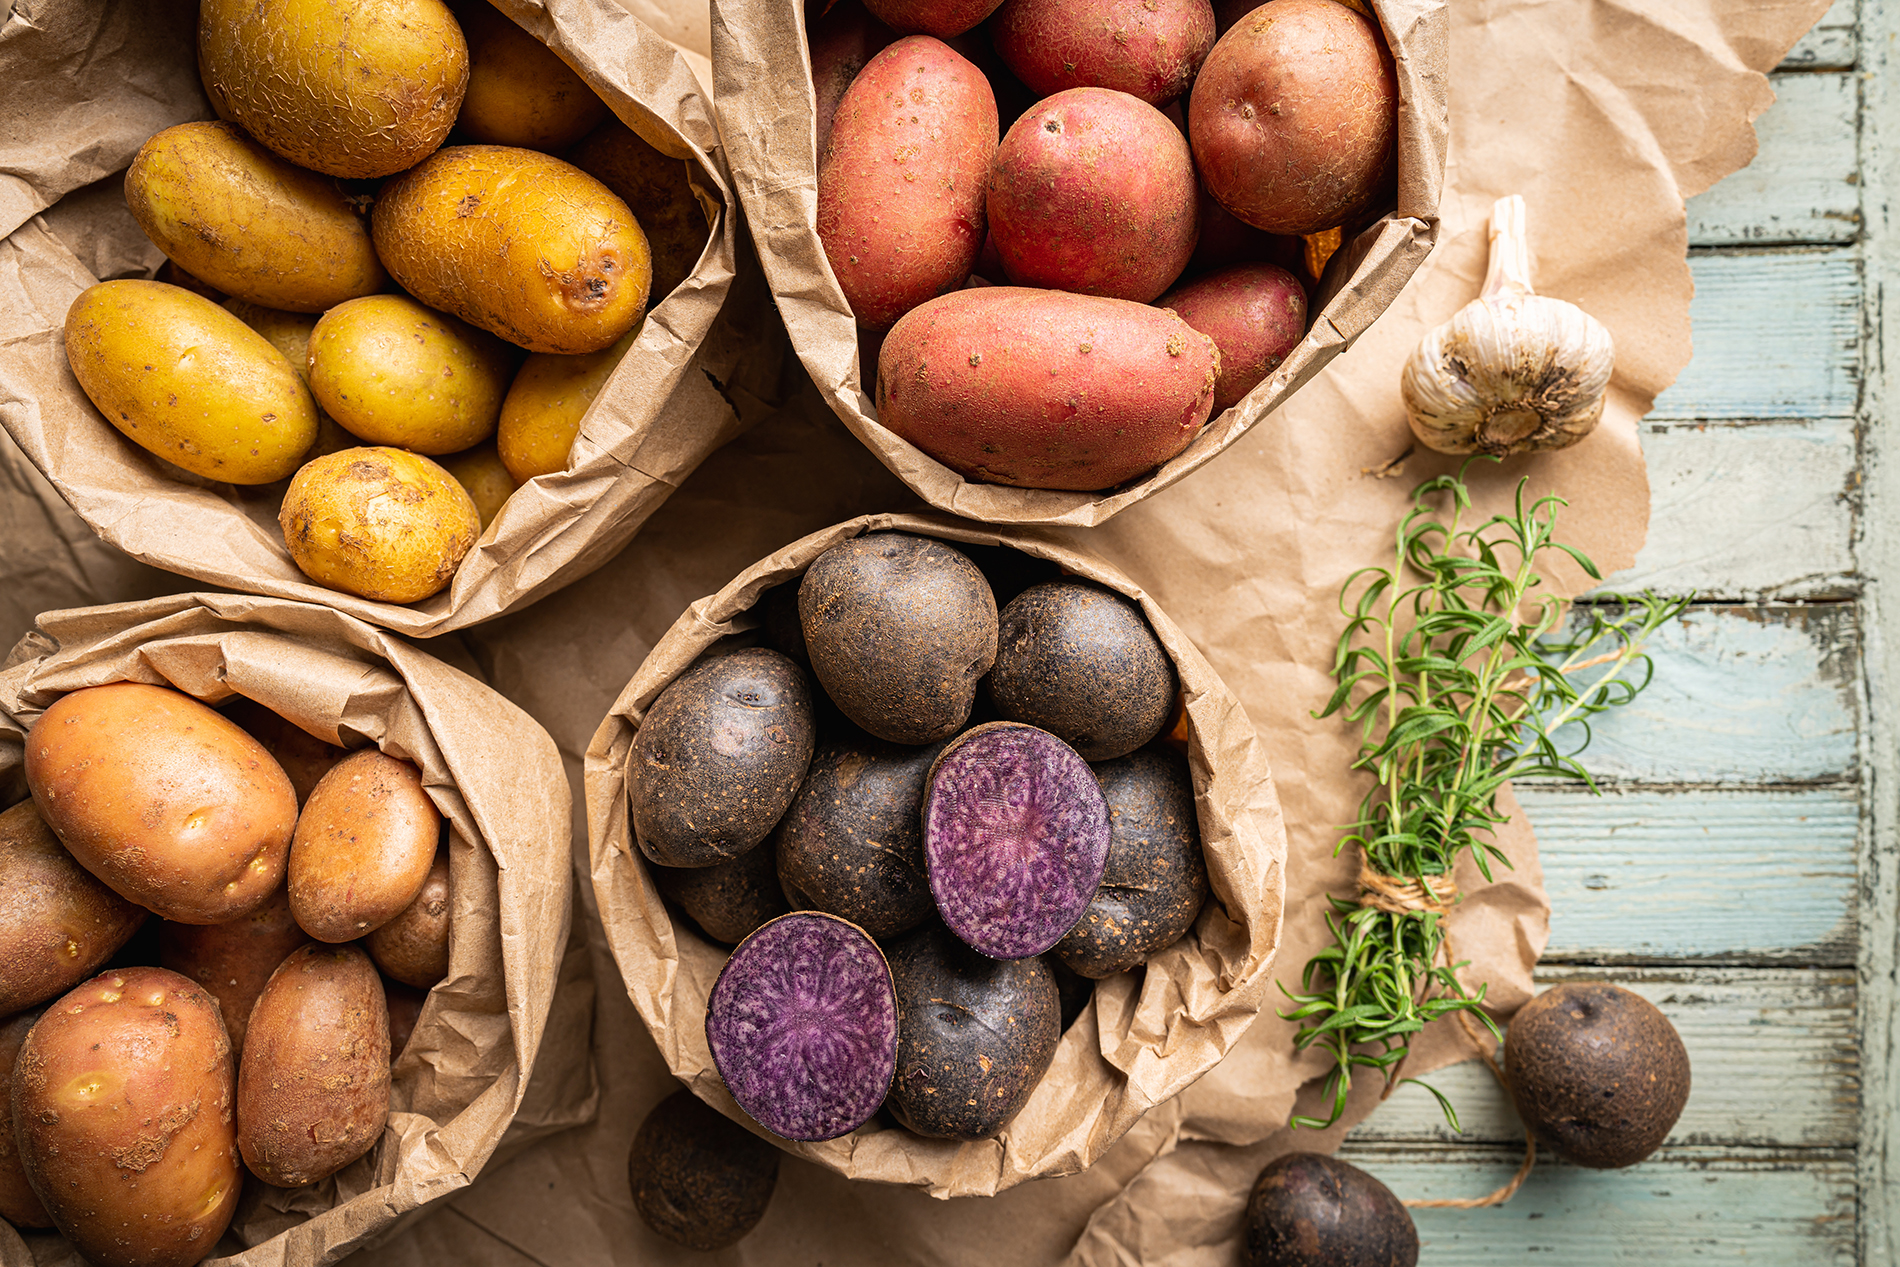 White, red, yellow and purple potatoes in baskets